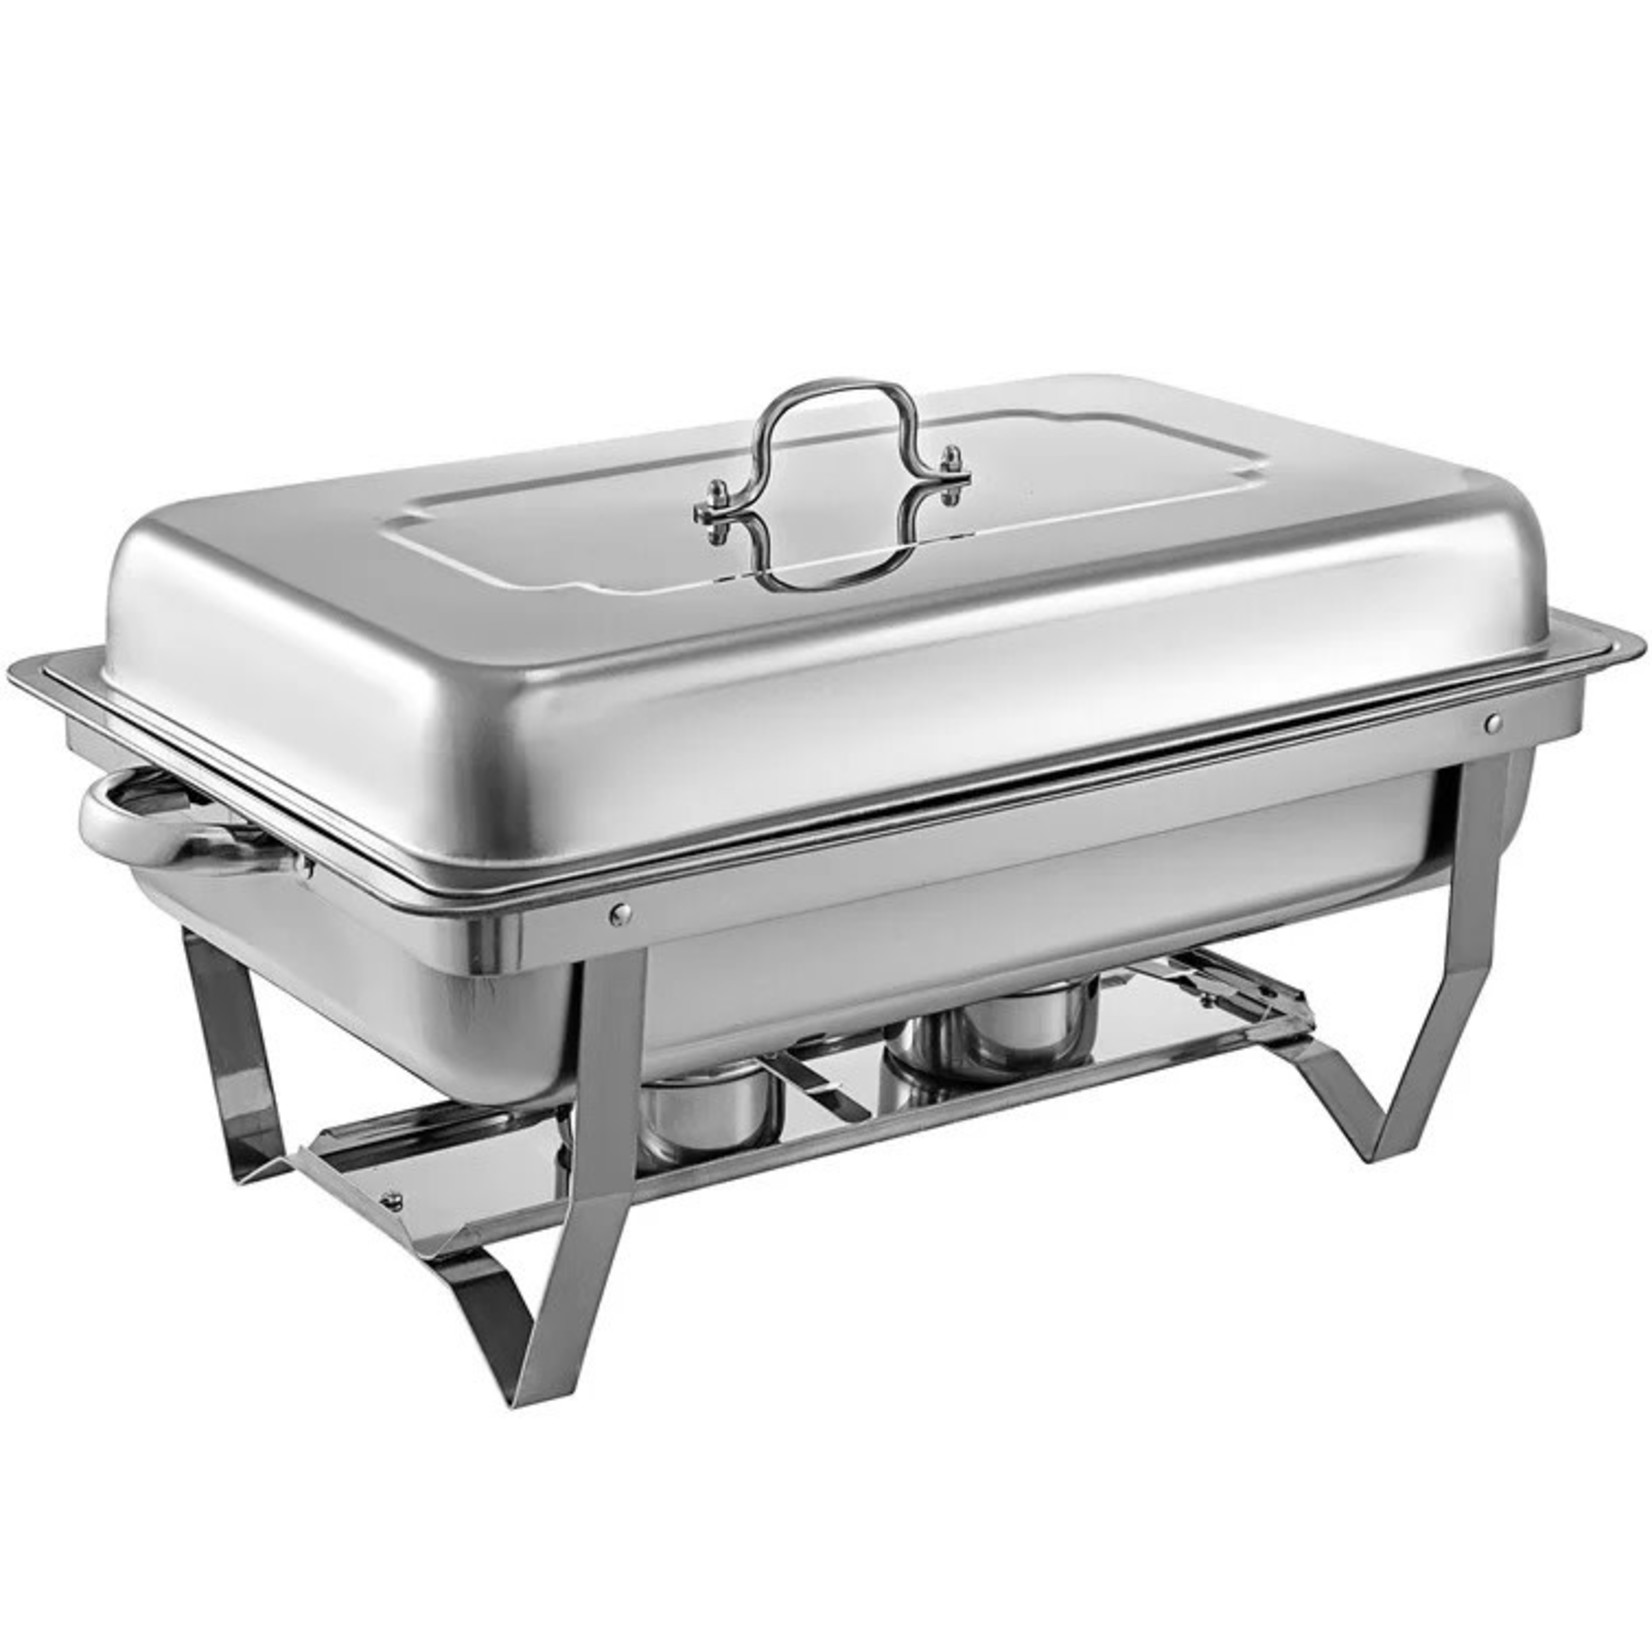 *Buffet Catering 8 qt. Chafing Dish - Stainless Steel